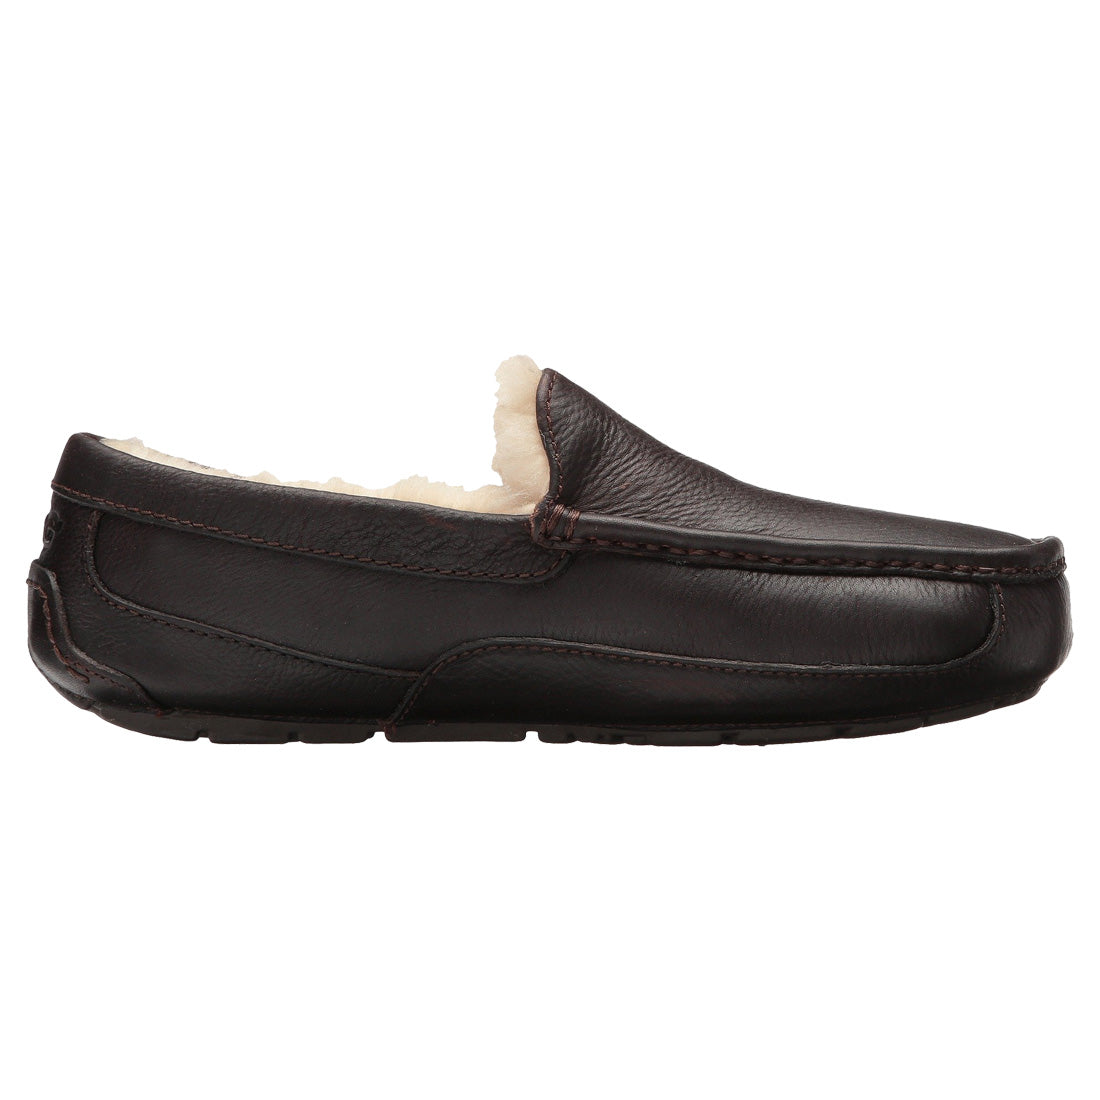 UGG Ascot Leather - Men's